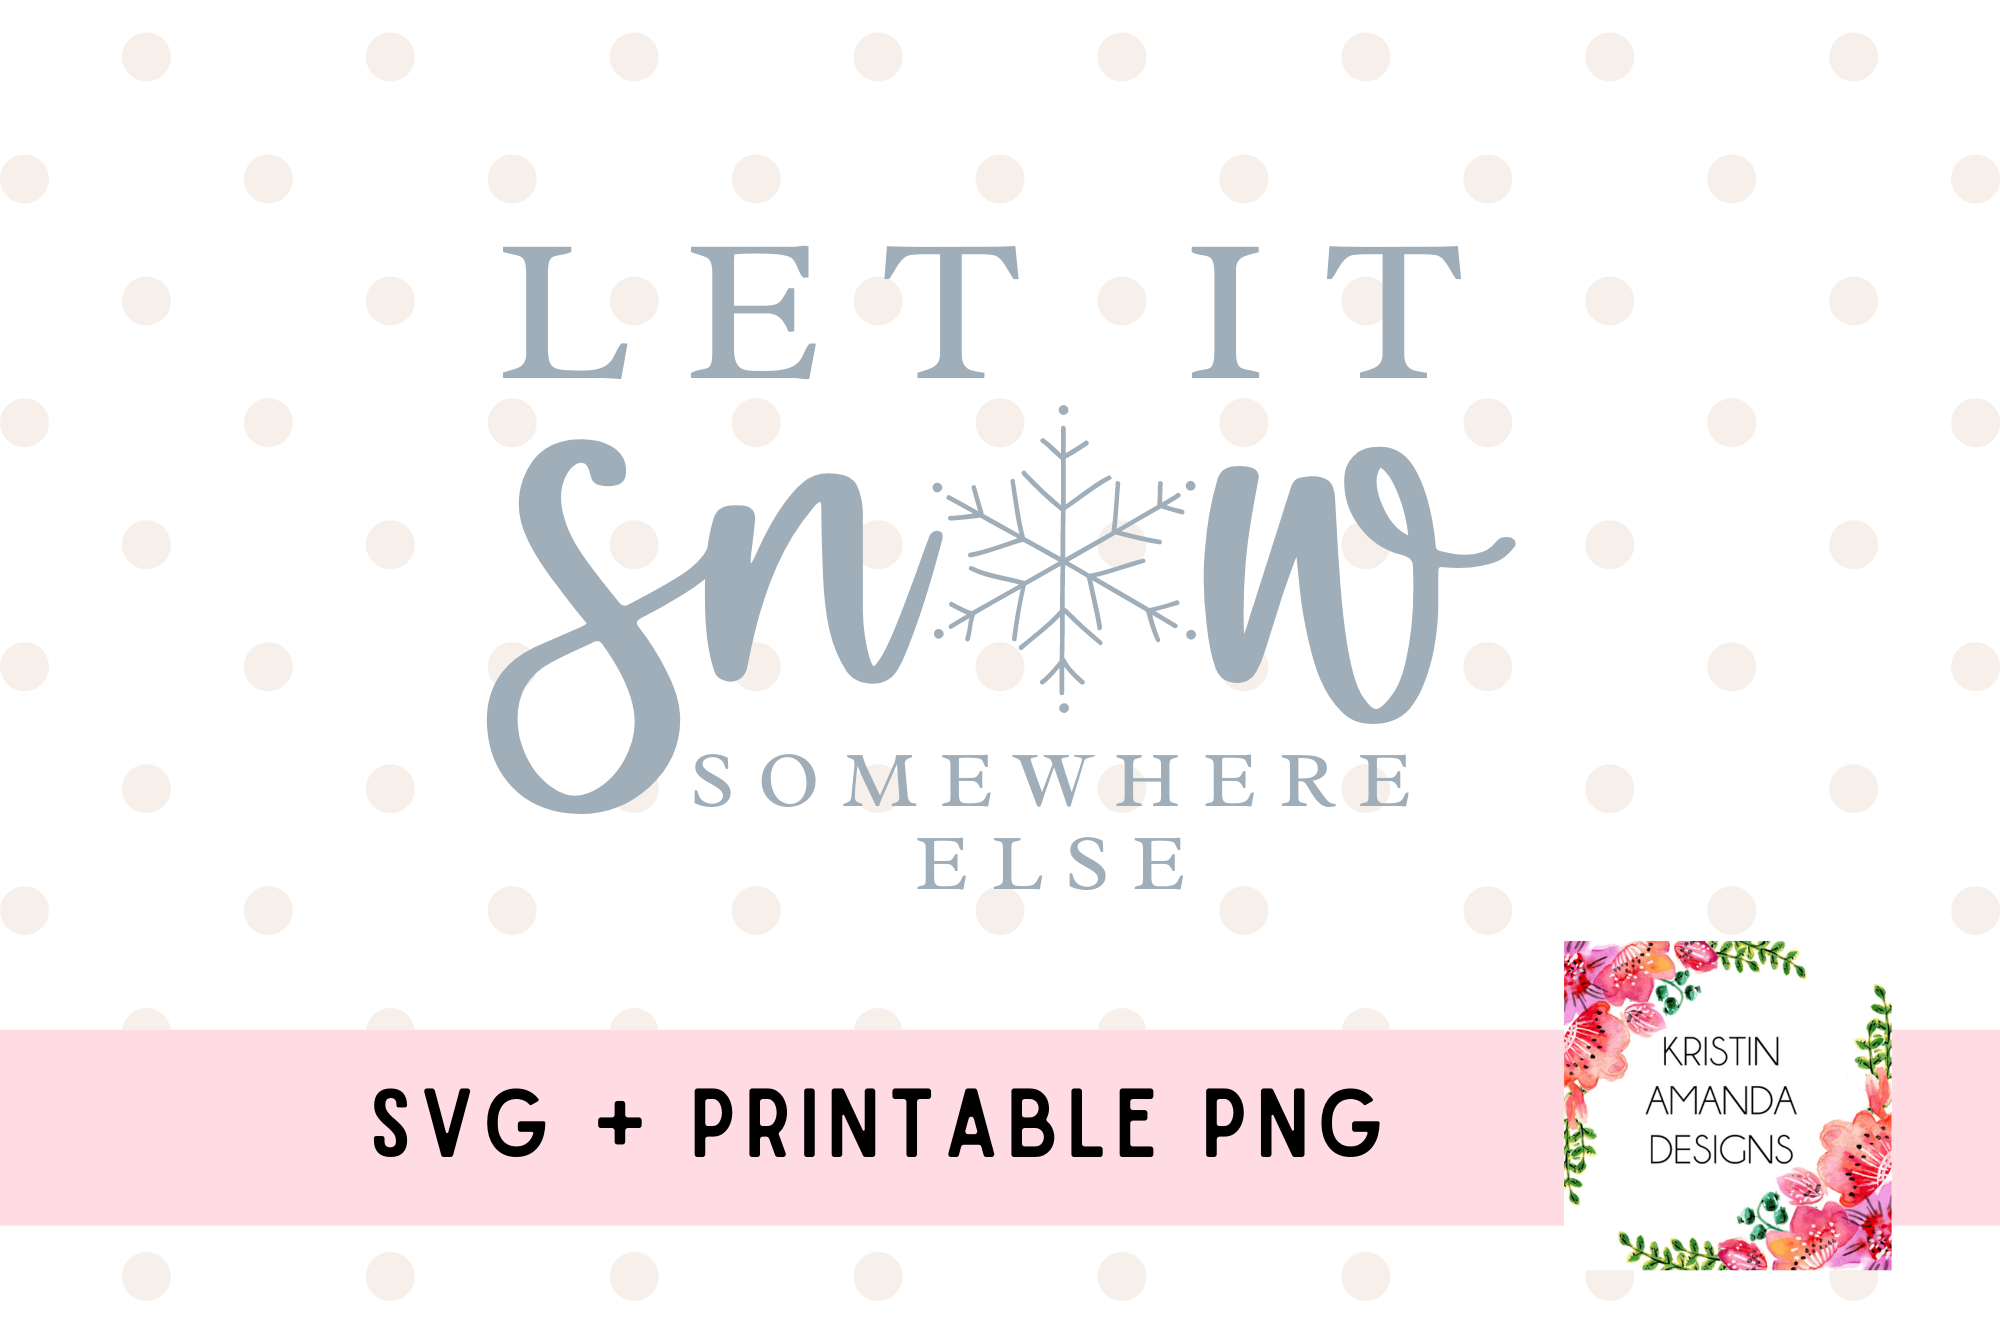 Let it Snow Somewhere Else Christmas SVG Cut File and Printable PNG • Cricut • Silhouette